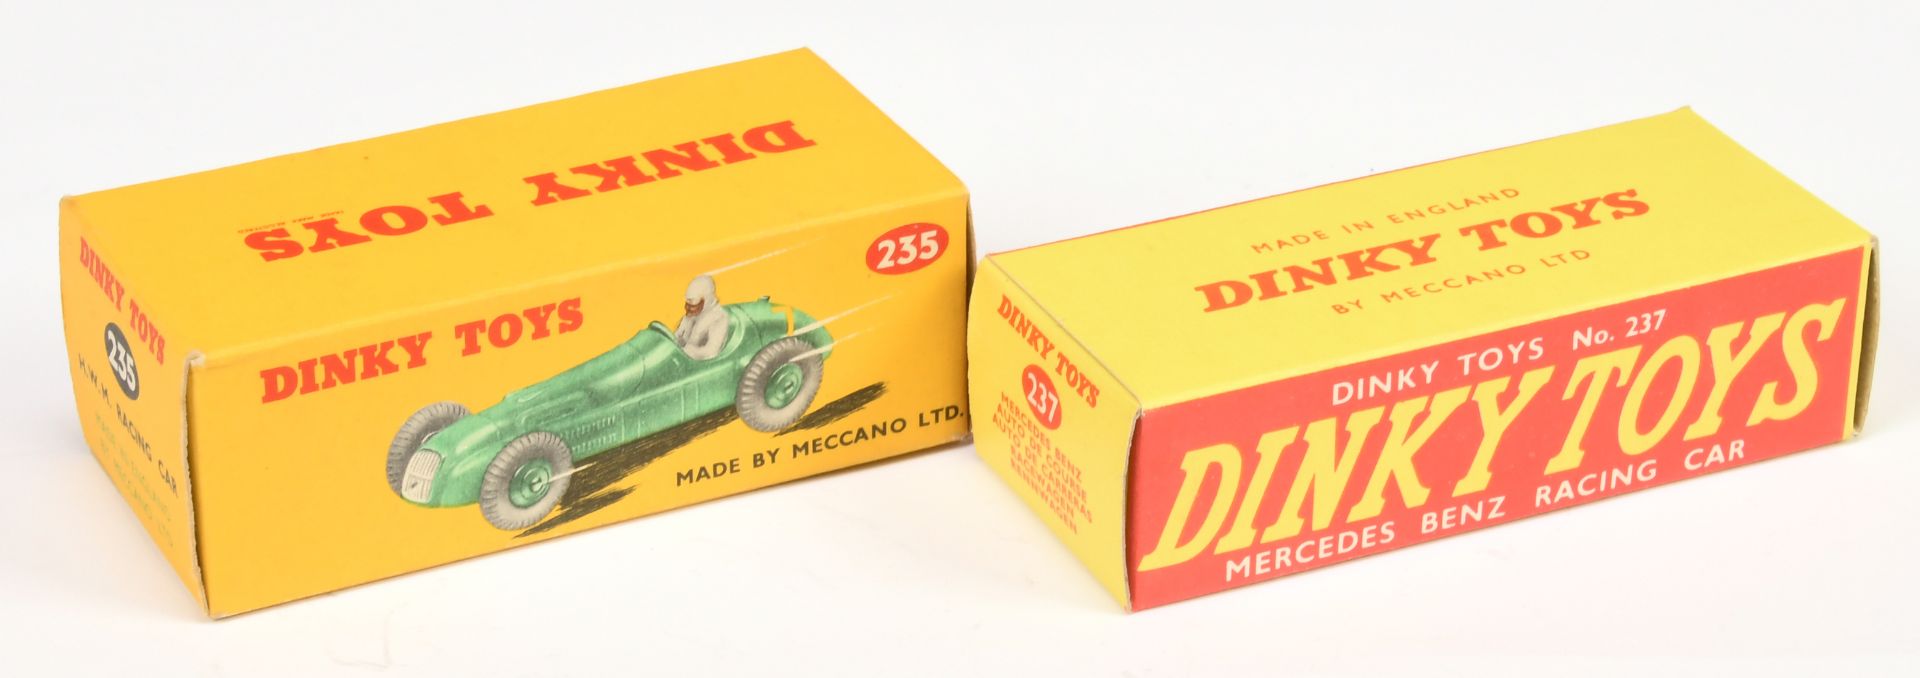 Dinky Toys Empty Boxes To Include (1) 235 HWM Racing Car - Yellow and red carded picture box is i...